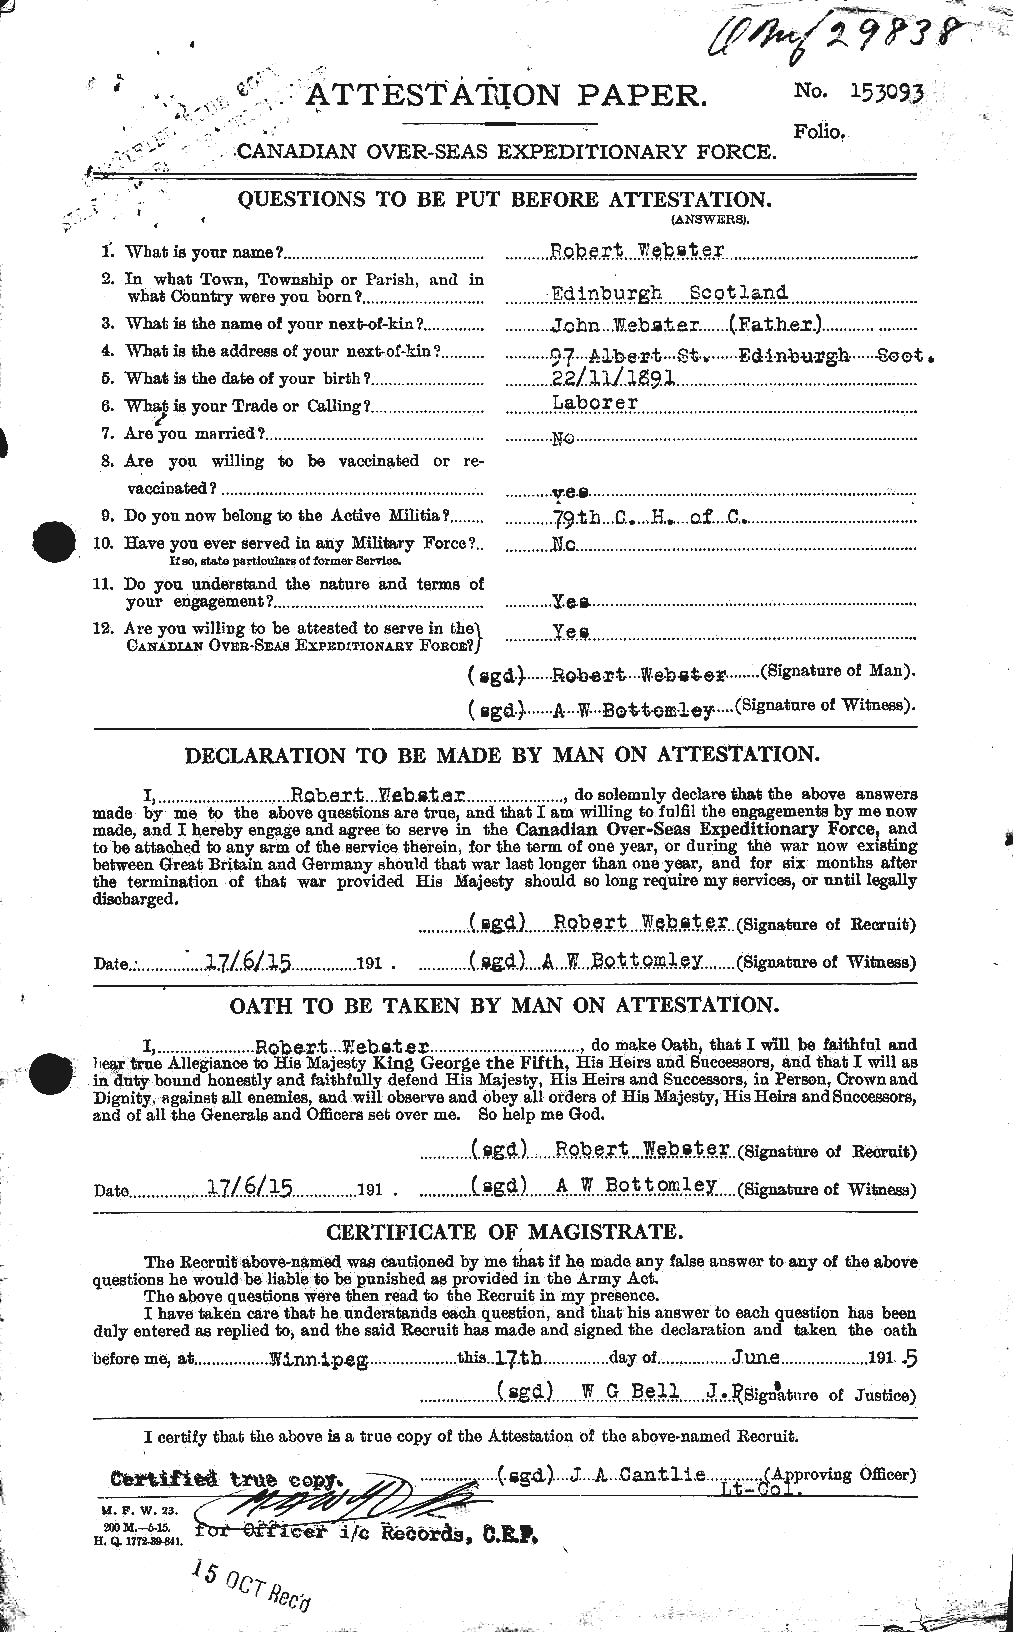 Personnel Records of the First World War - CEF 661953a